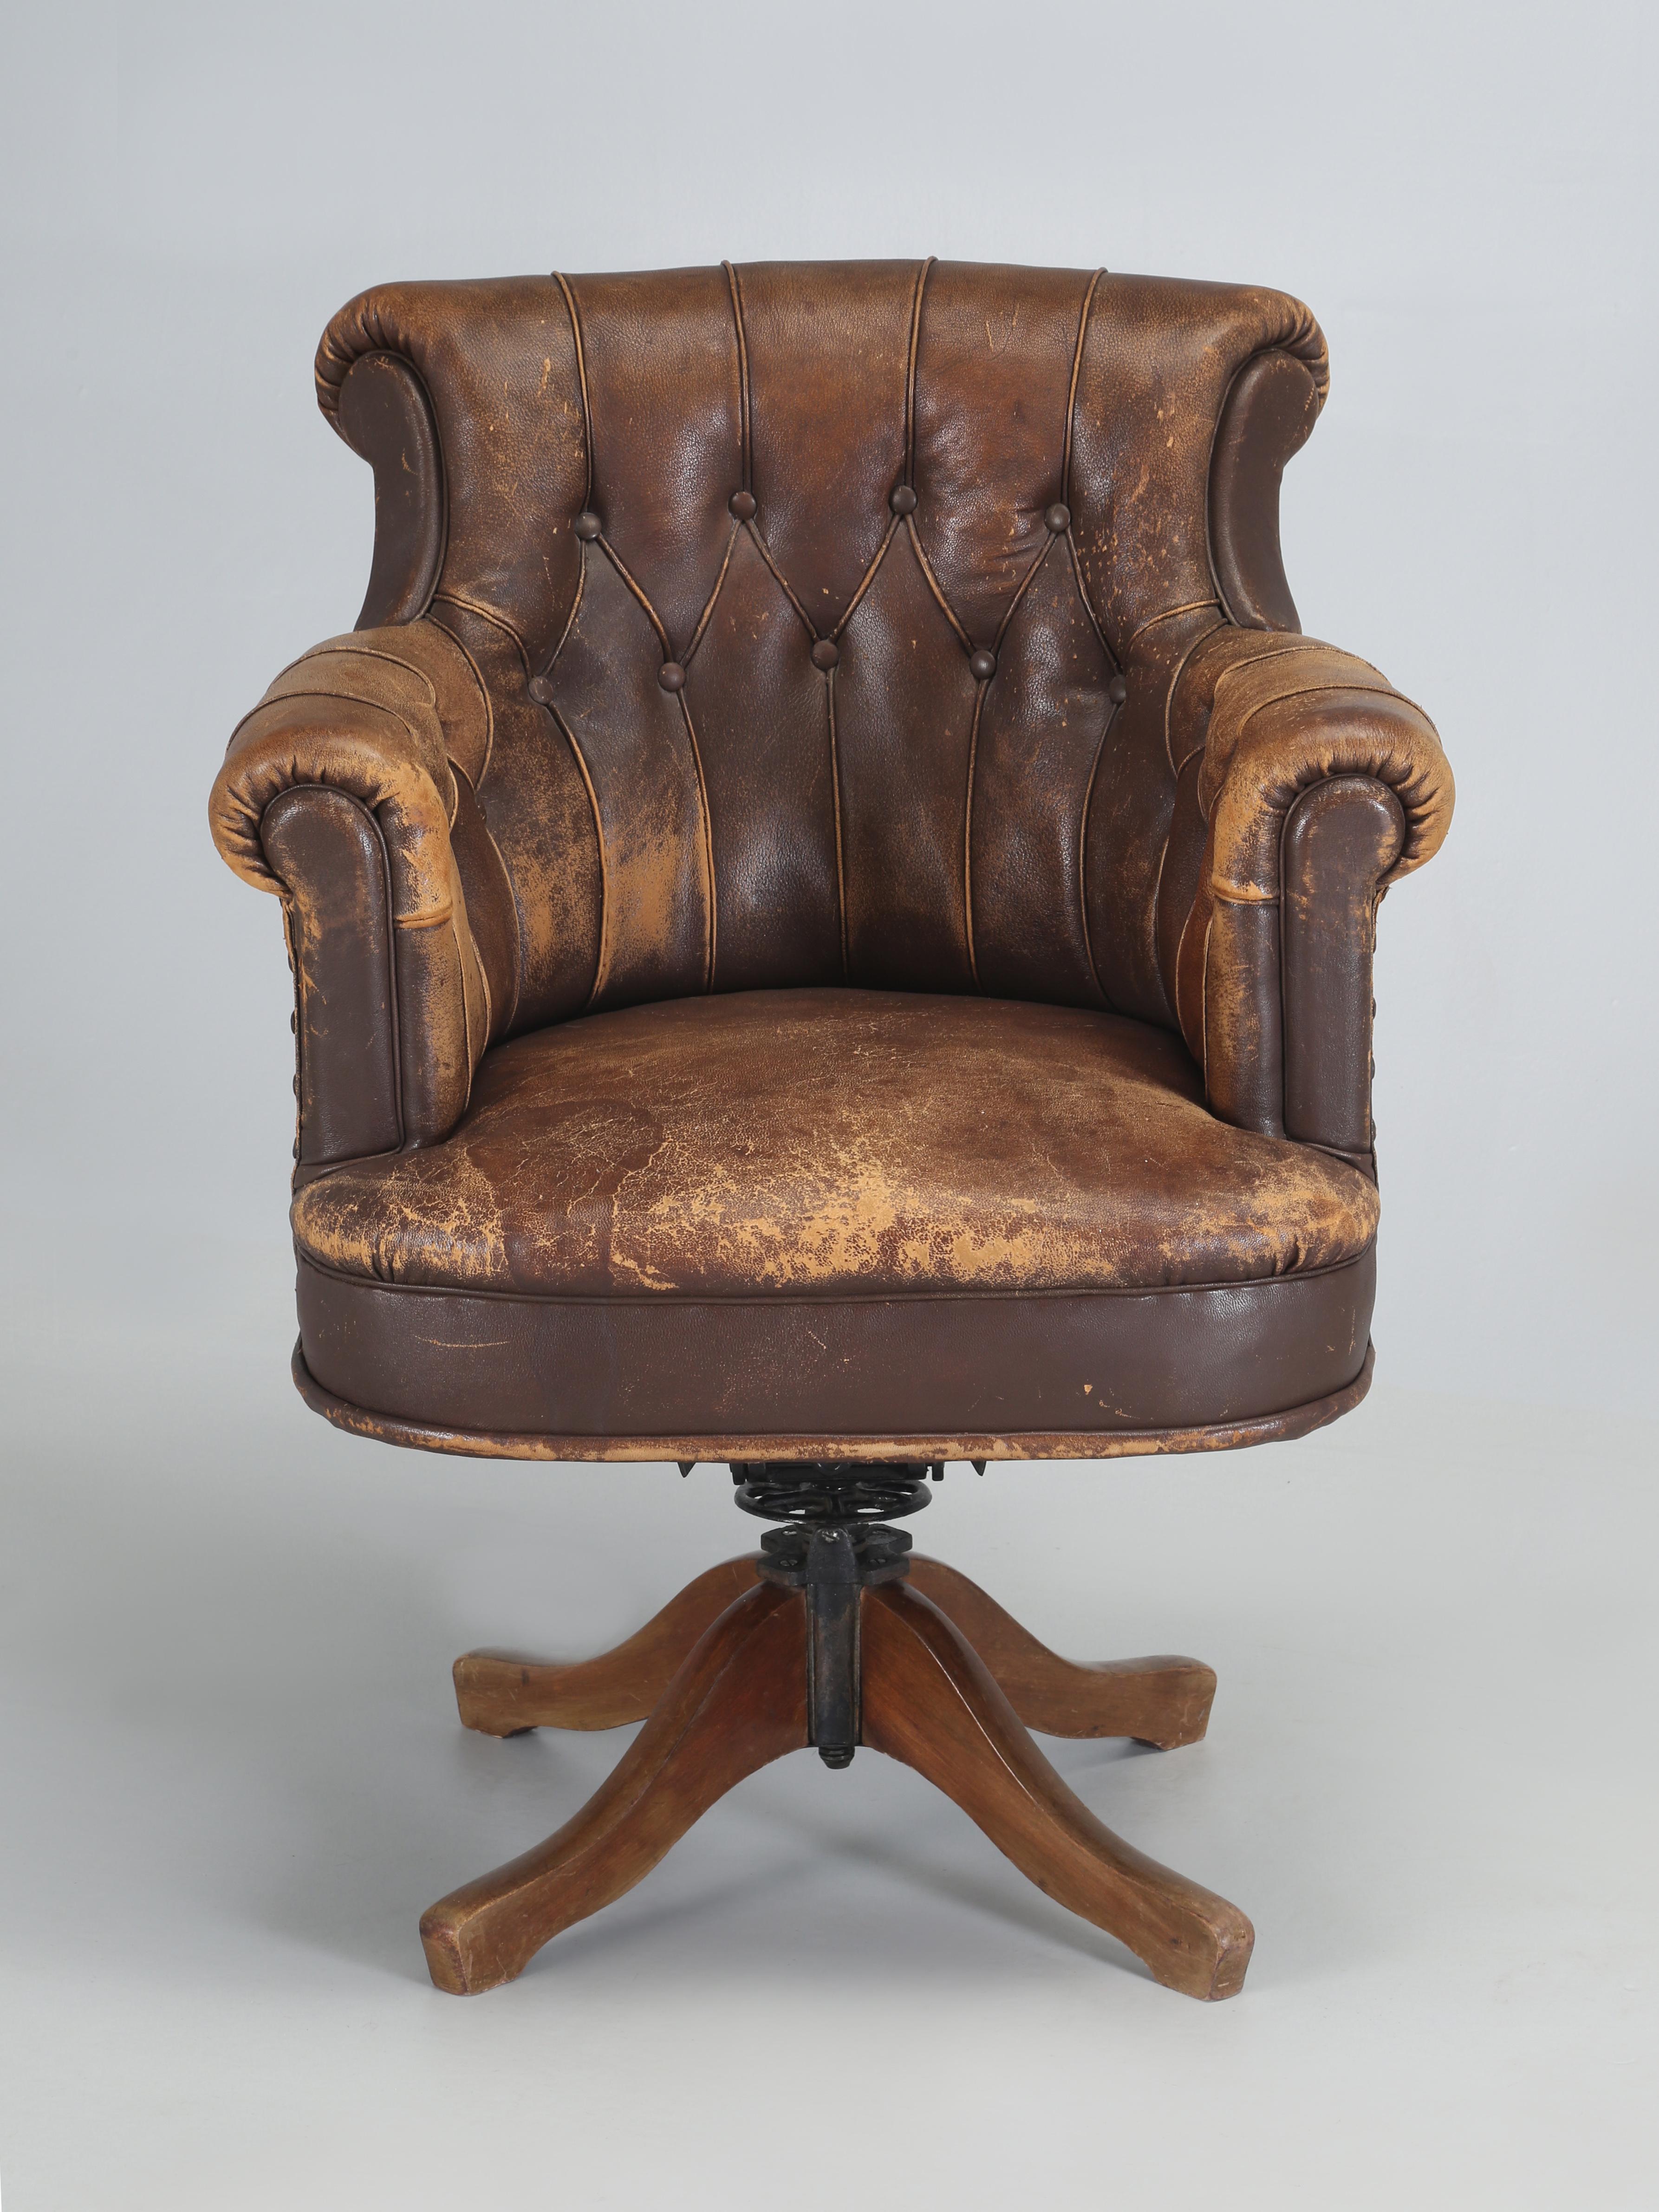 Antique French Leather Desk Chair and of all the items we import from France, one of the most difficult items to find are a nice Old Leather Desk Chair, that no one has tried to restore and make look new. To the best of our knowledge, this Antique